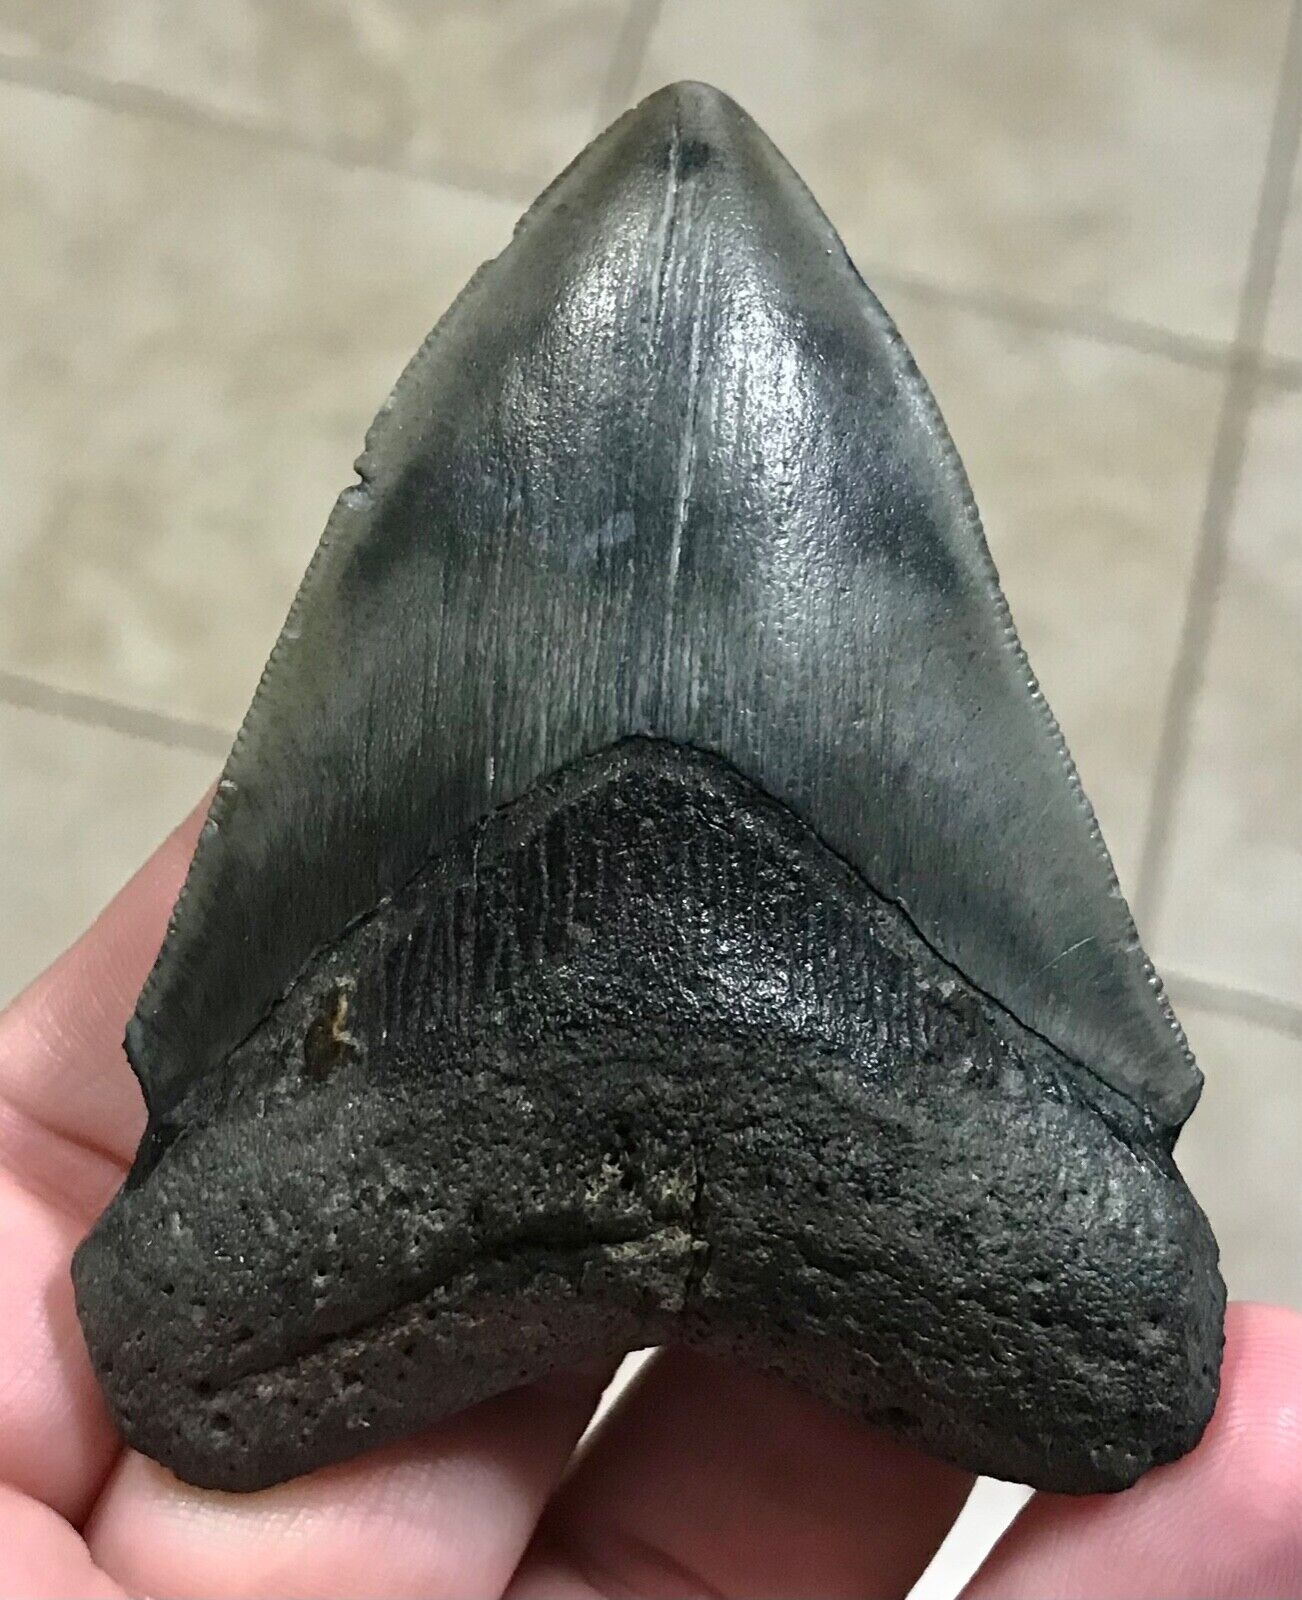 AWESOME “ARROW HEAD” SHAPED UPPER - 3.42” x 2.61” Megalodon Shark Tooth Fossil